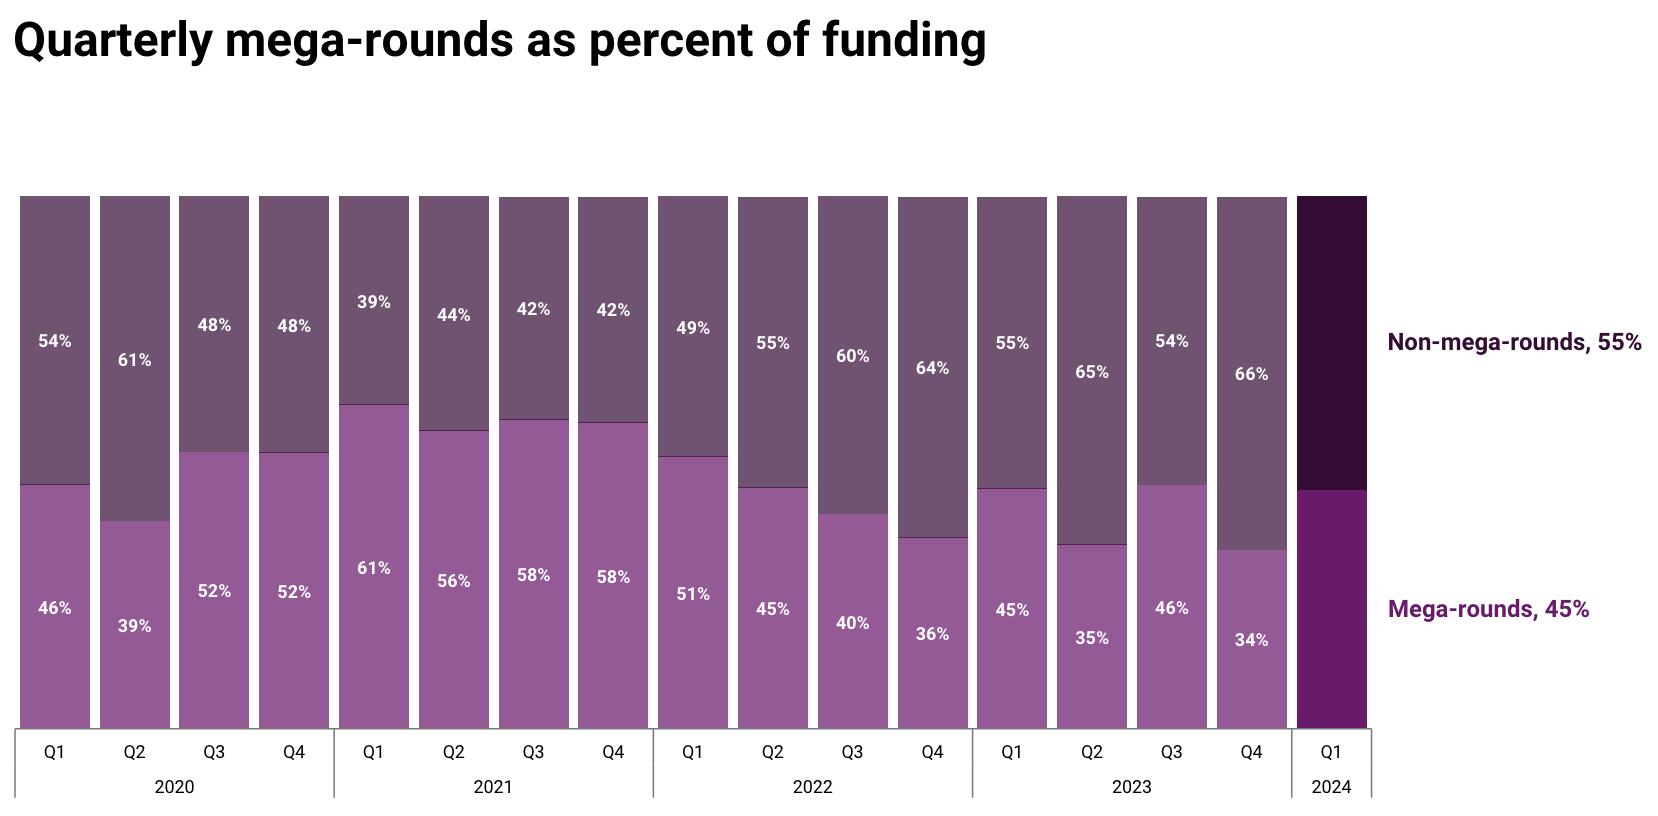 Quarterly mega-rounds as percent of funding, Source: State of Venture Q1 2024, CB Insights, Apr 2024